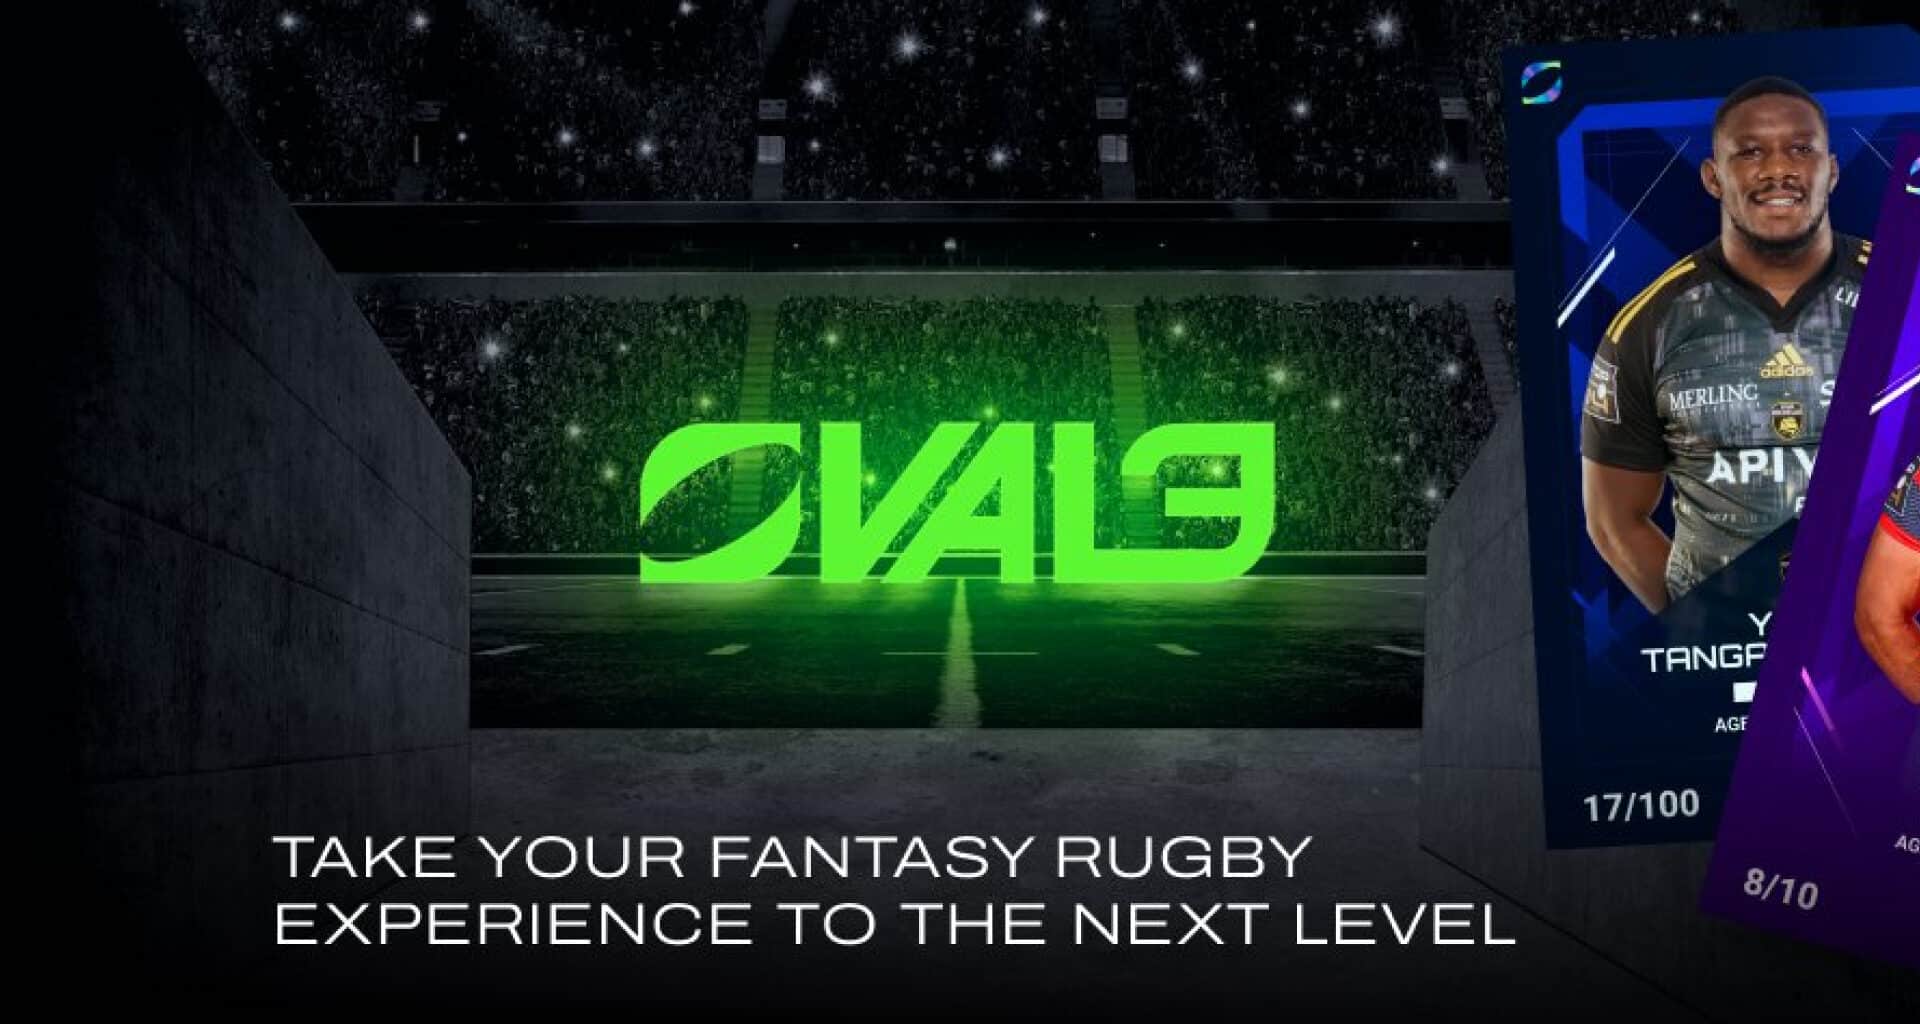 OVAL3 Rugby